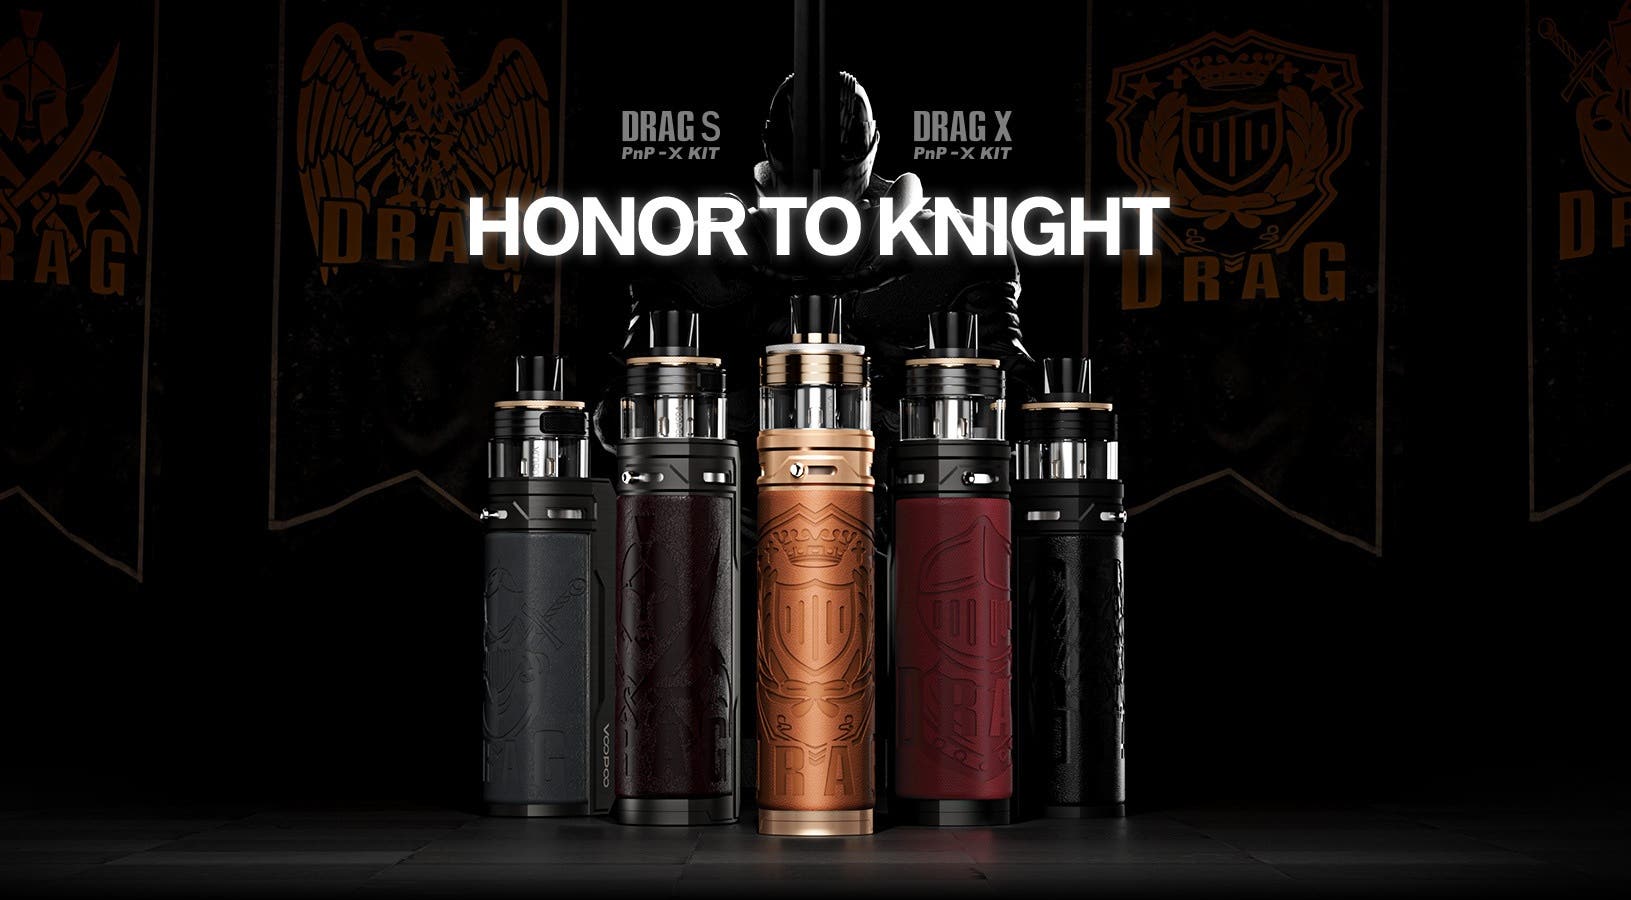 The Drag S PnP-X Kit. Honor to knight.